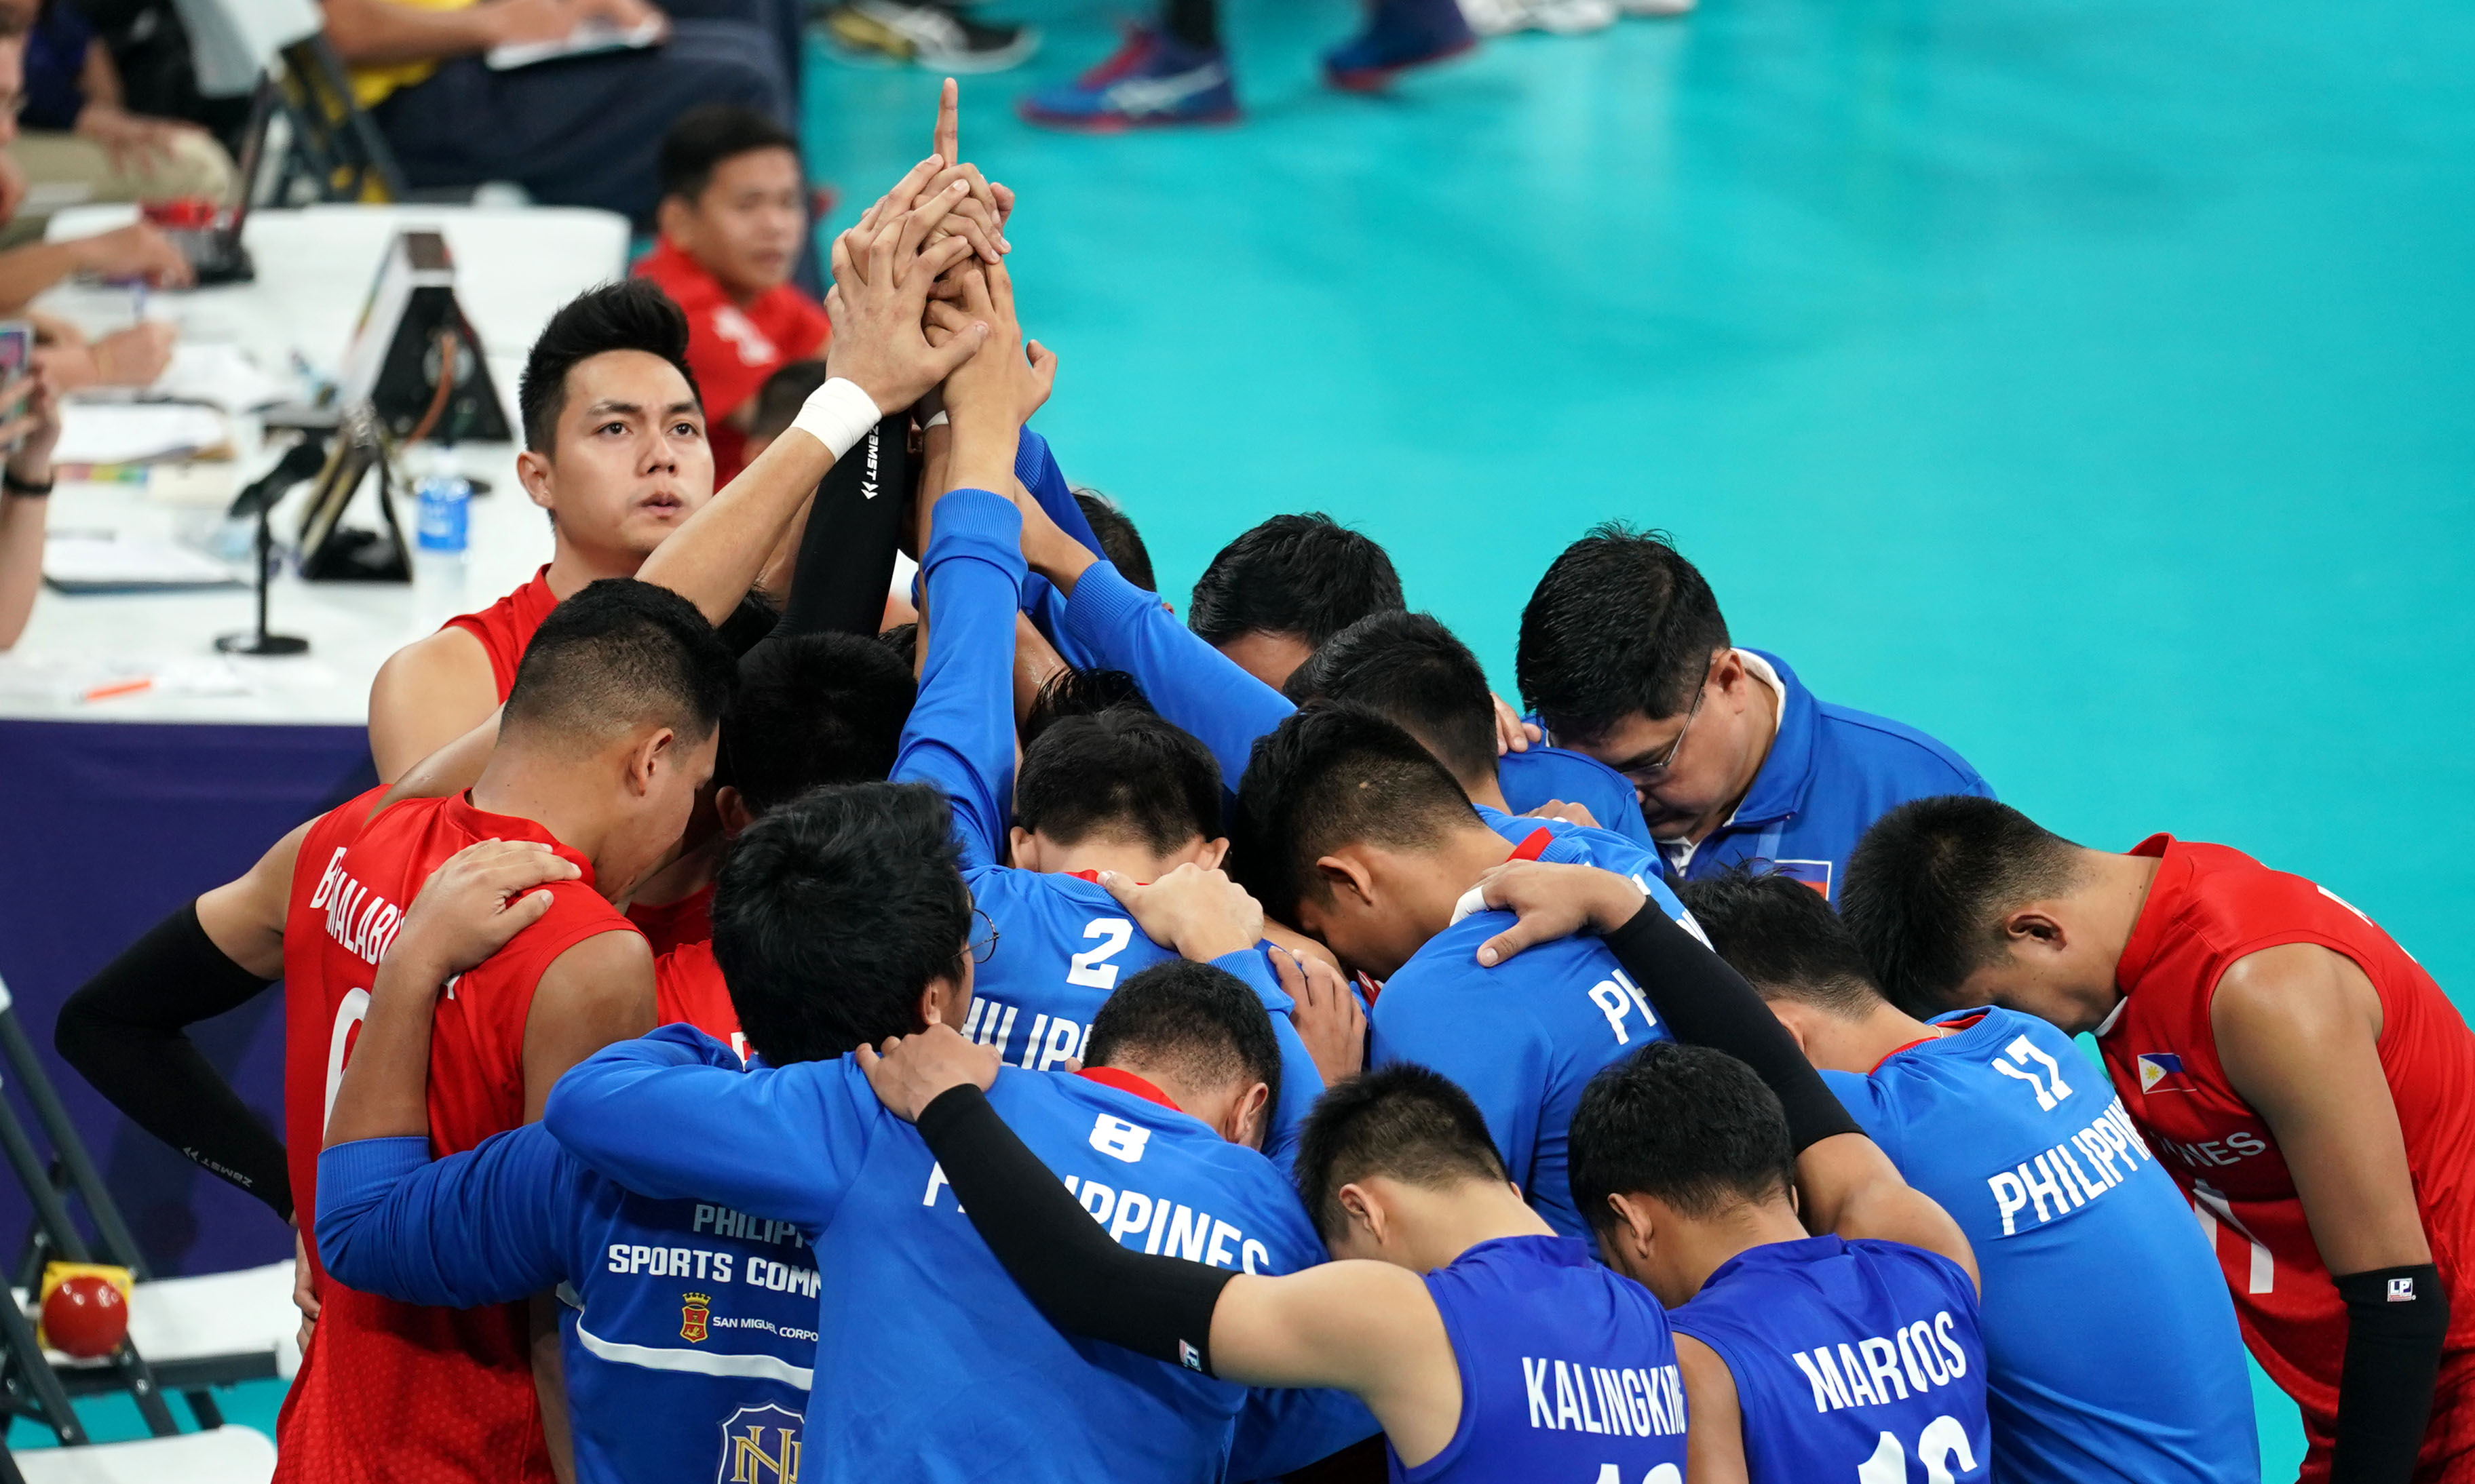 The unheraldedmen’s team provided the biggest volleyball story of the year after clinching a surprise silver in the SEA Games.